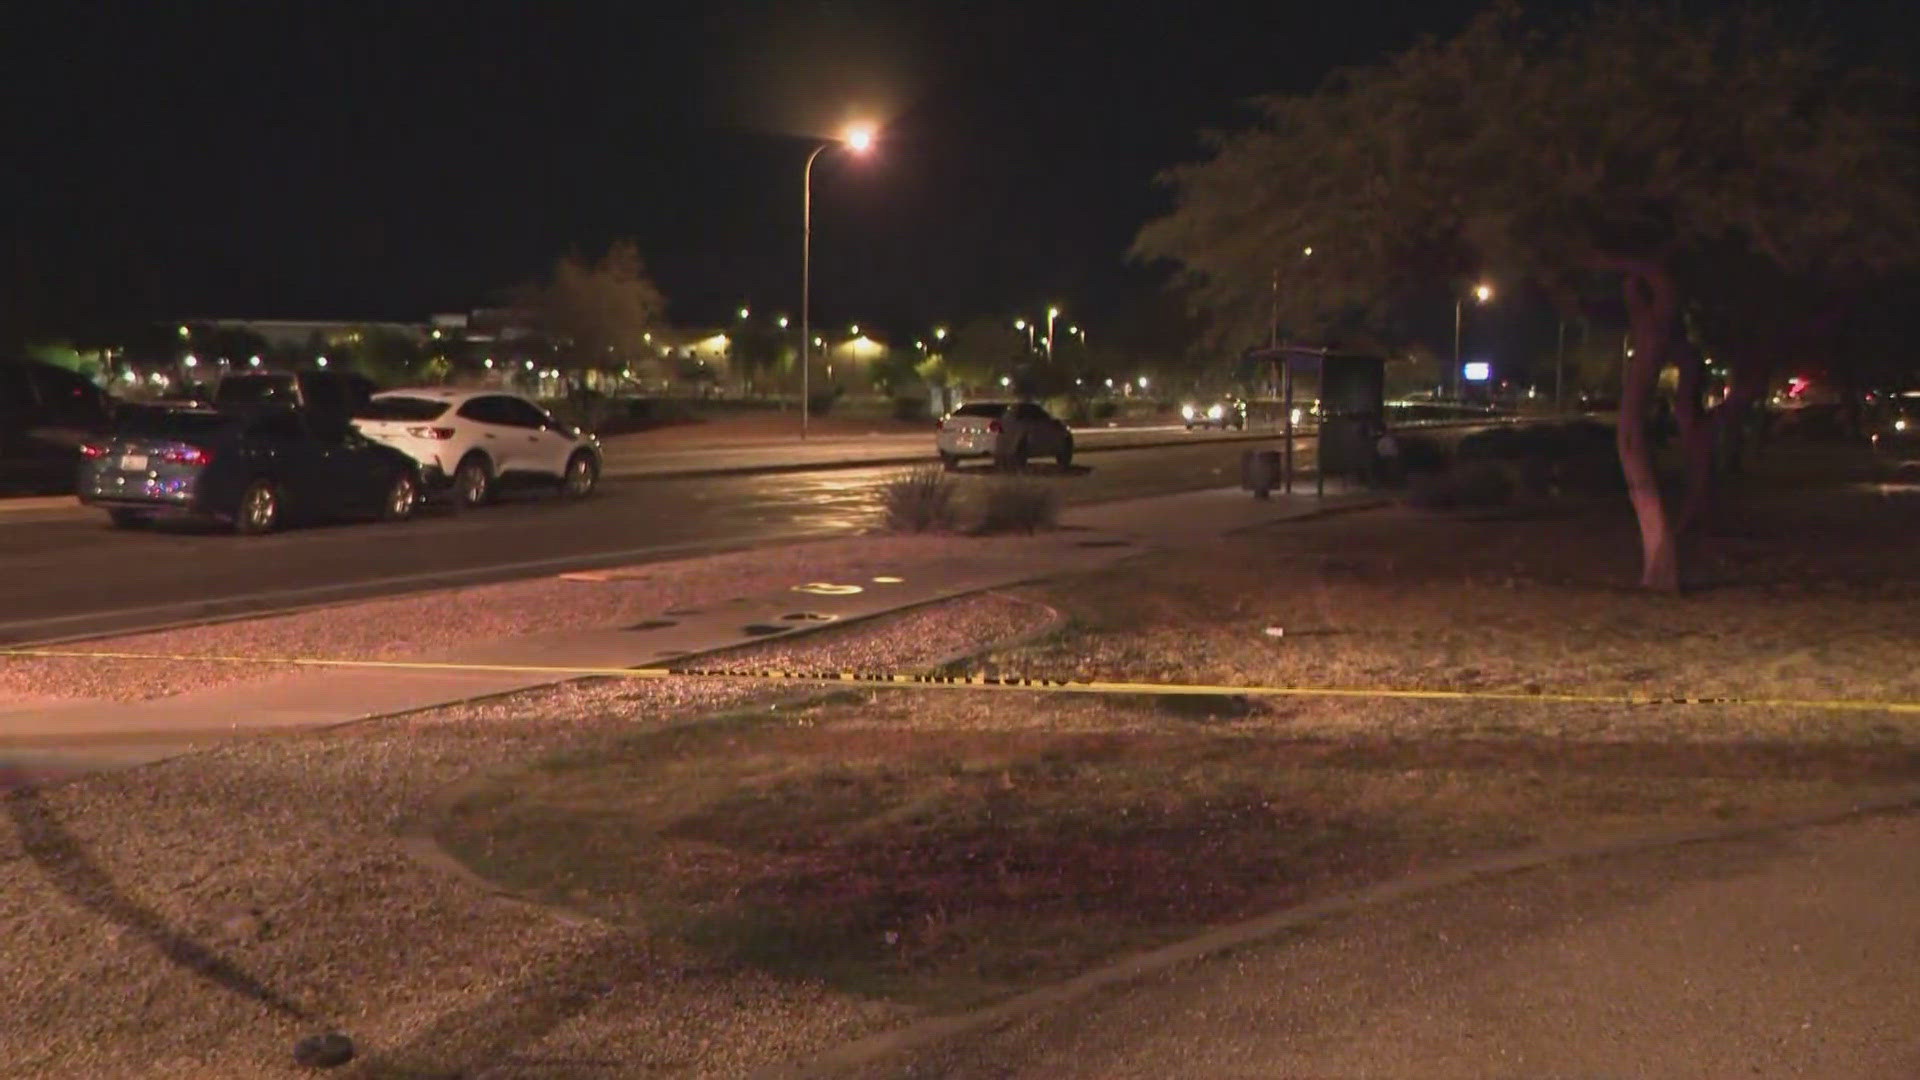 Phoenix police said a man died after being stabbed near 39th Ave and Baseline.